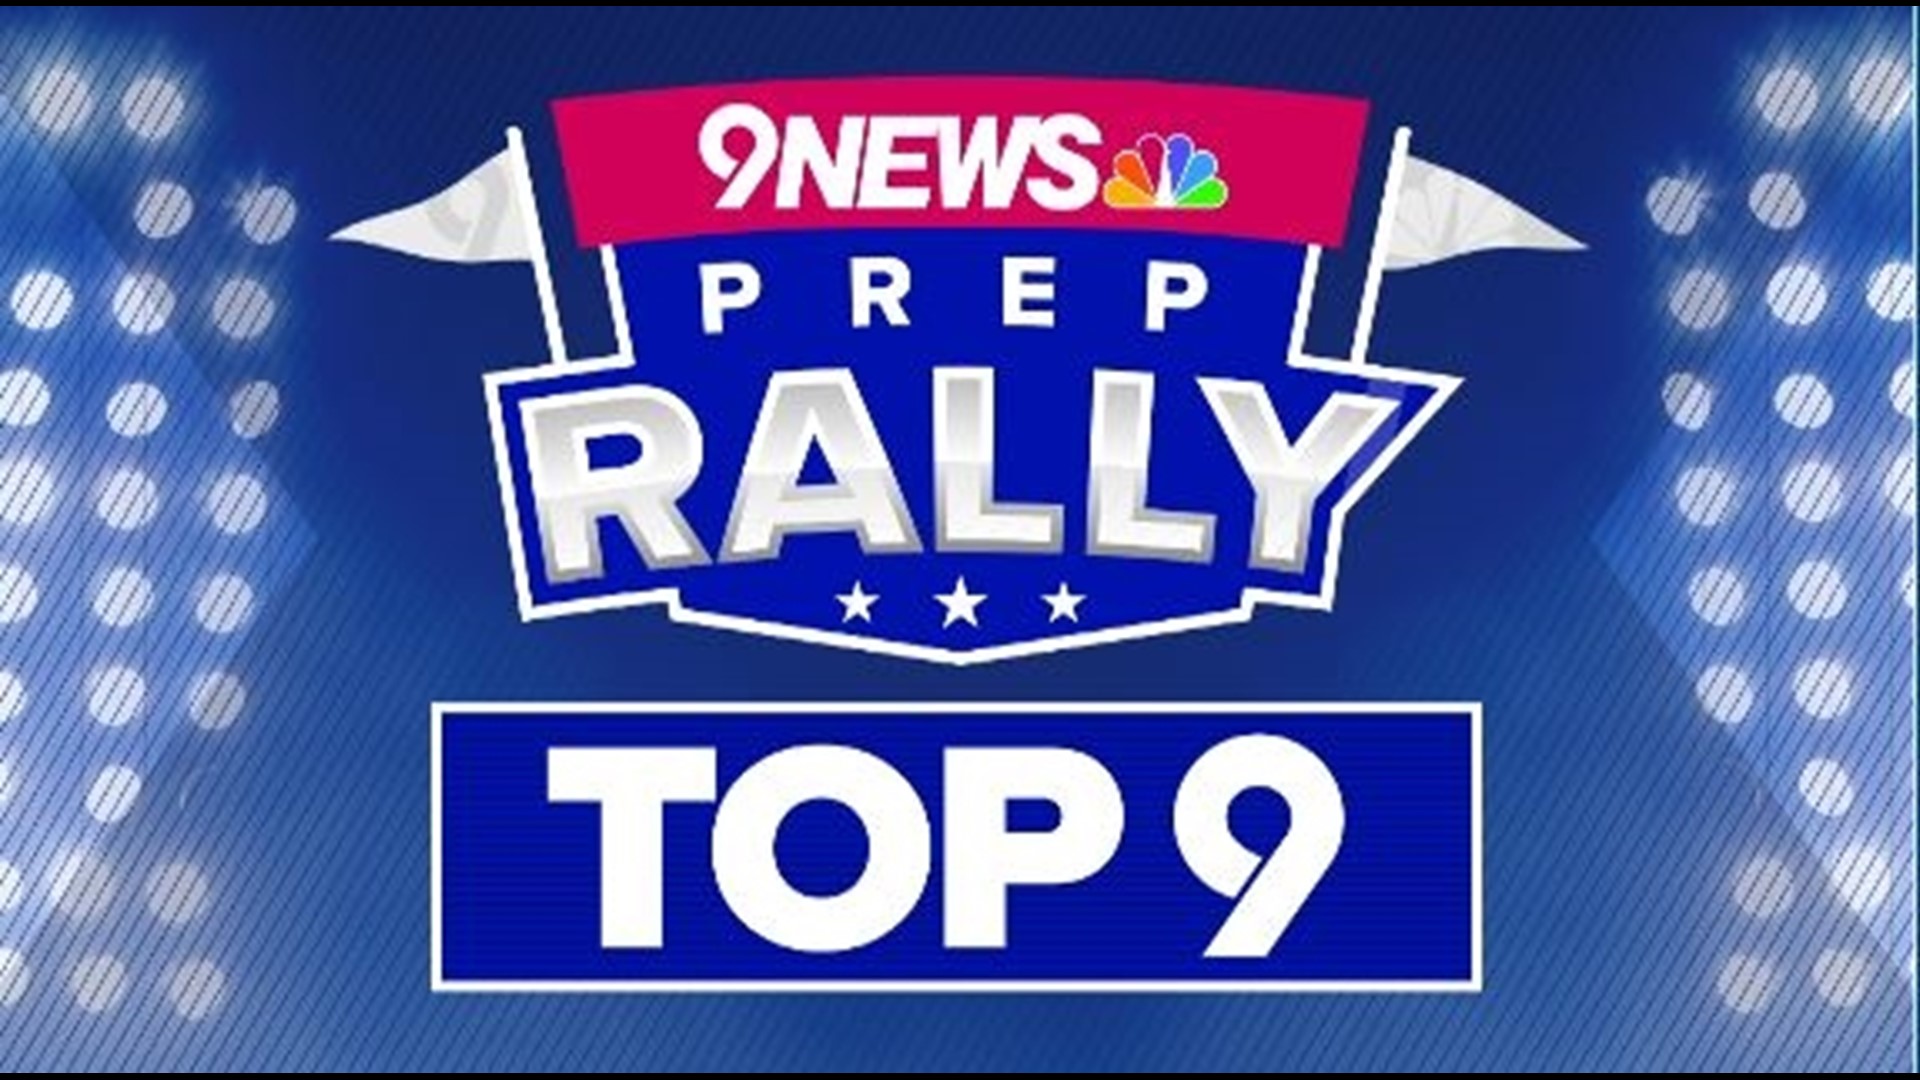 Check out the best high school sports moments the 9Preps team caught this year, then vote for your favorite!